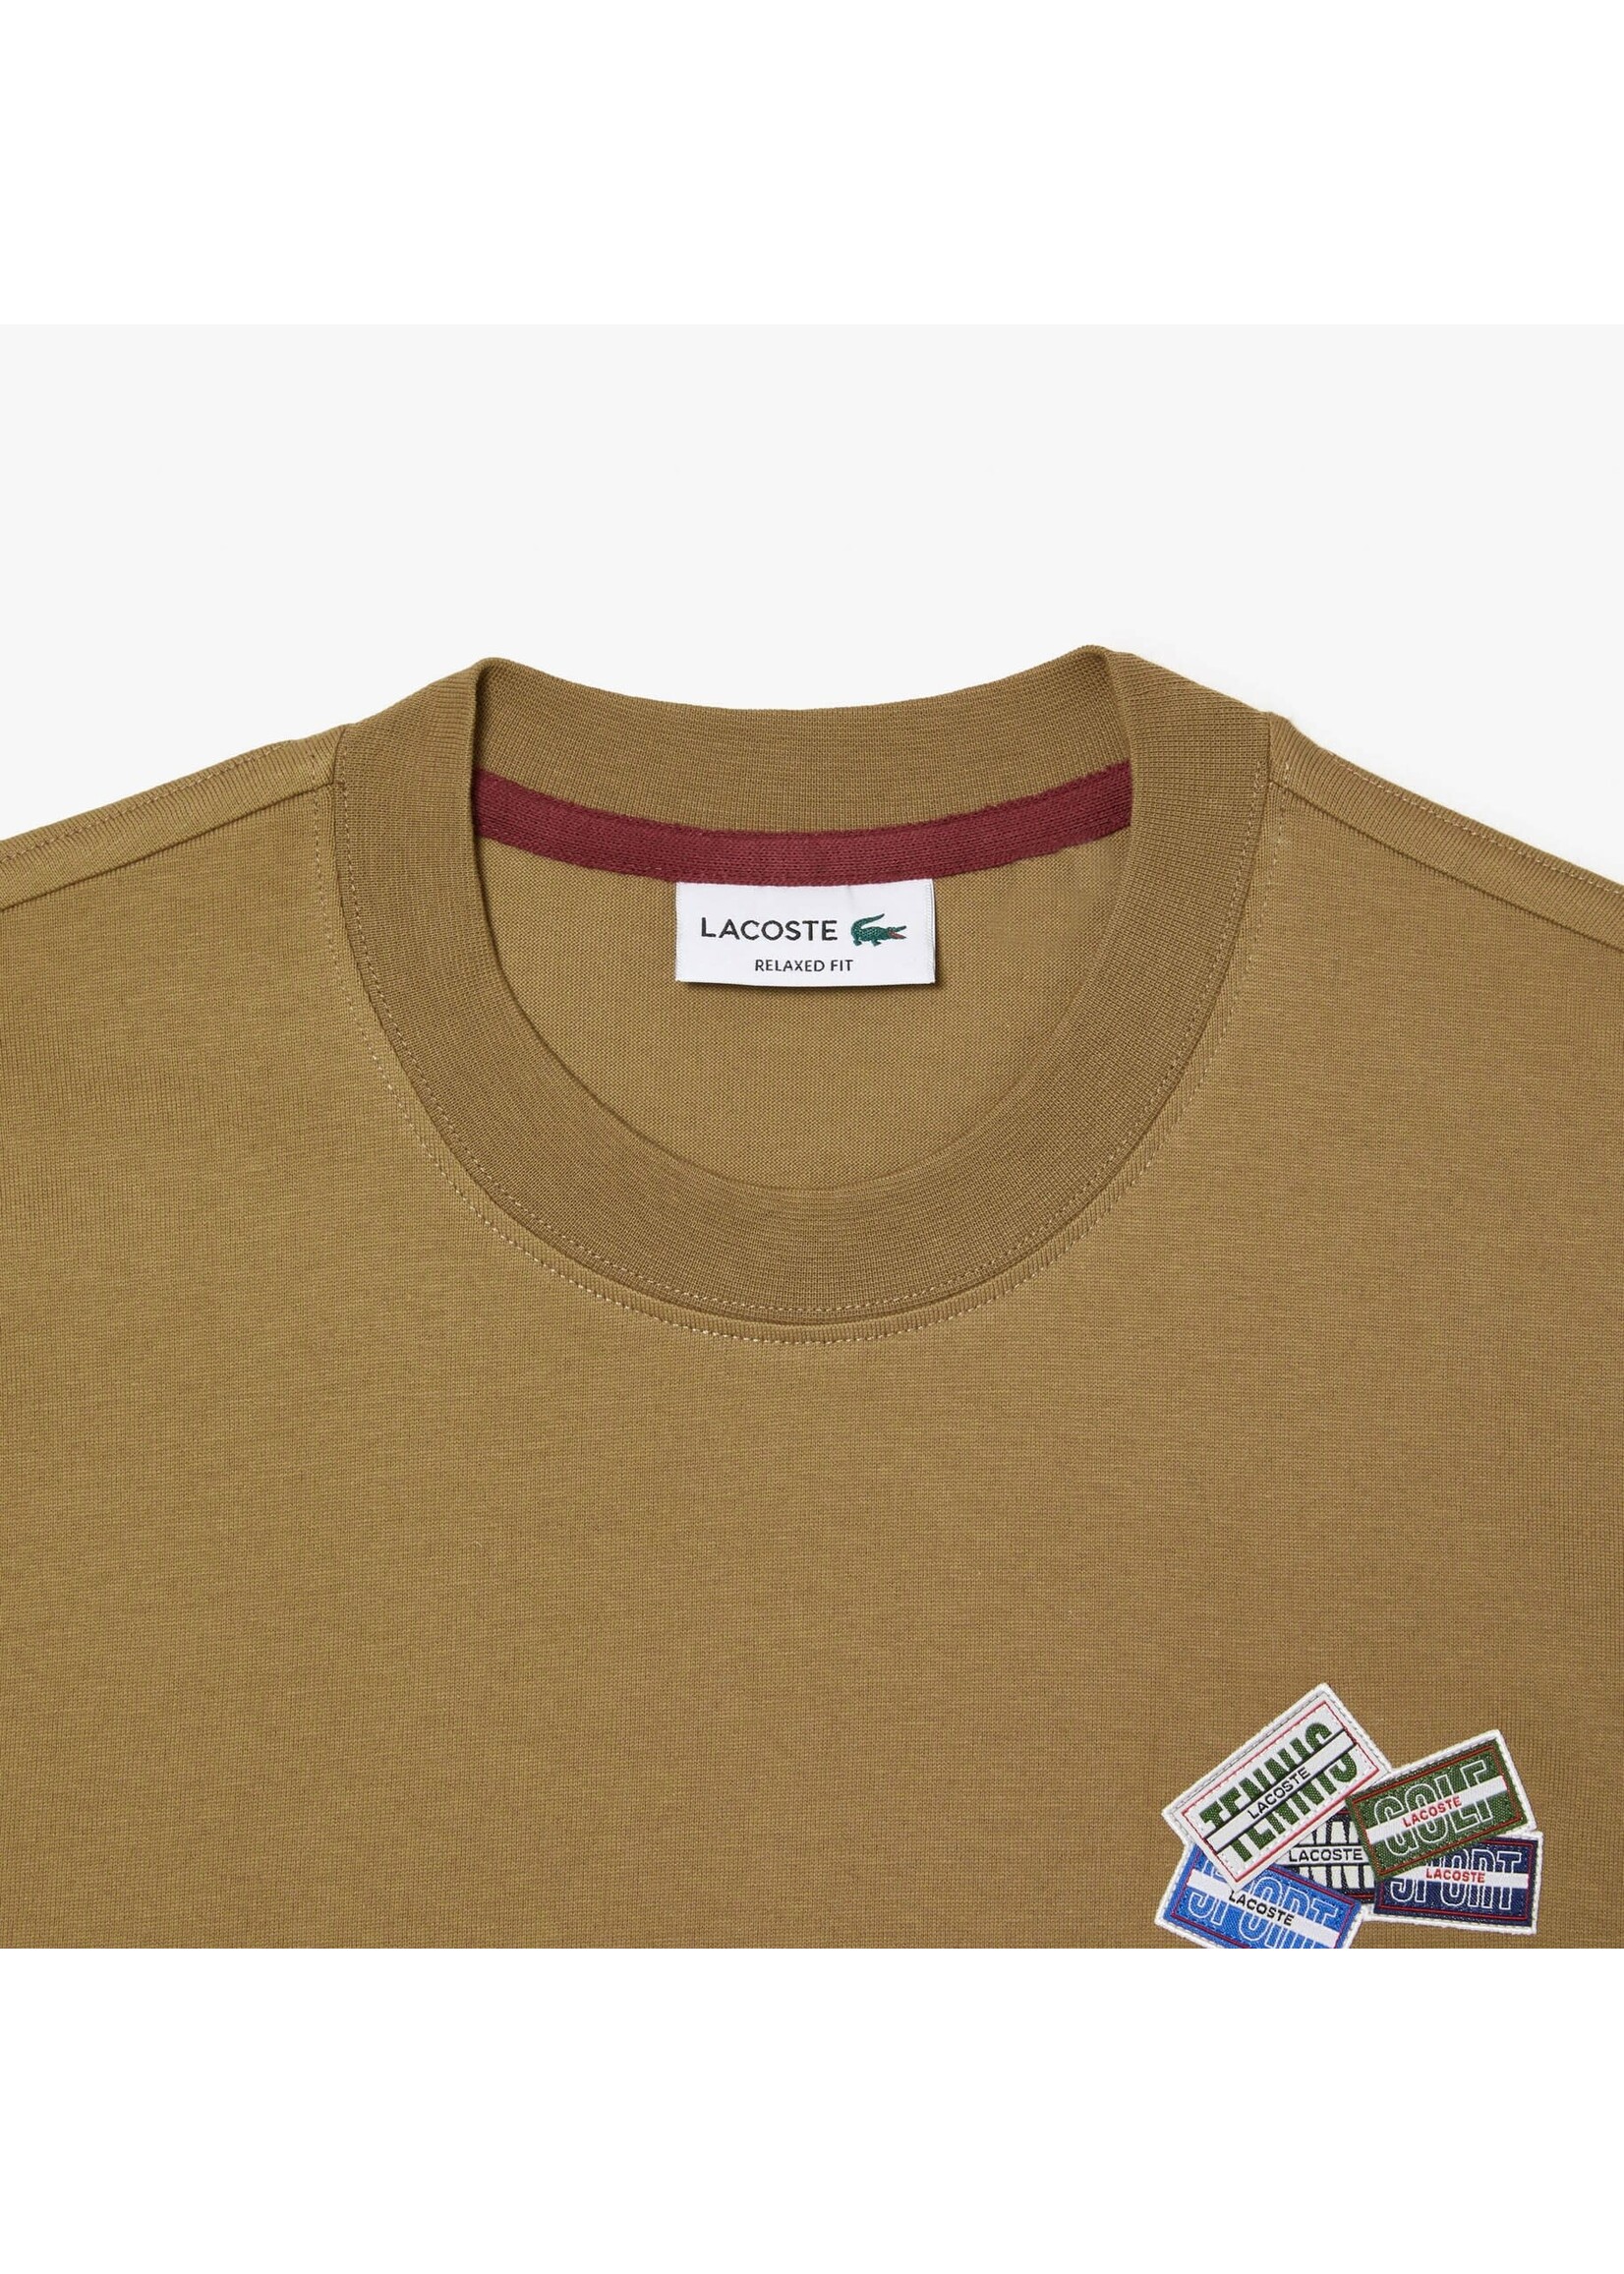 Lacoste Patch Jersey